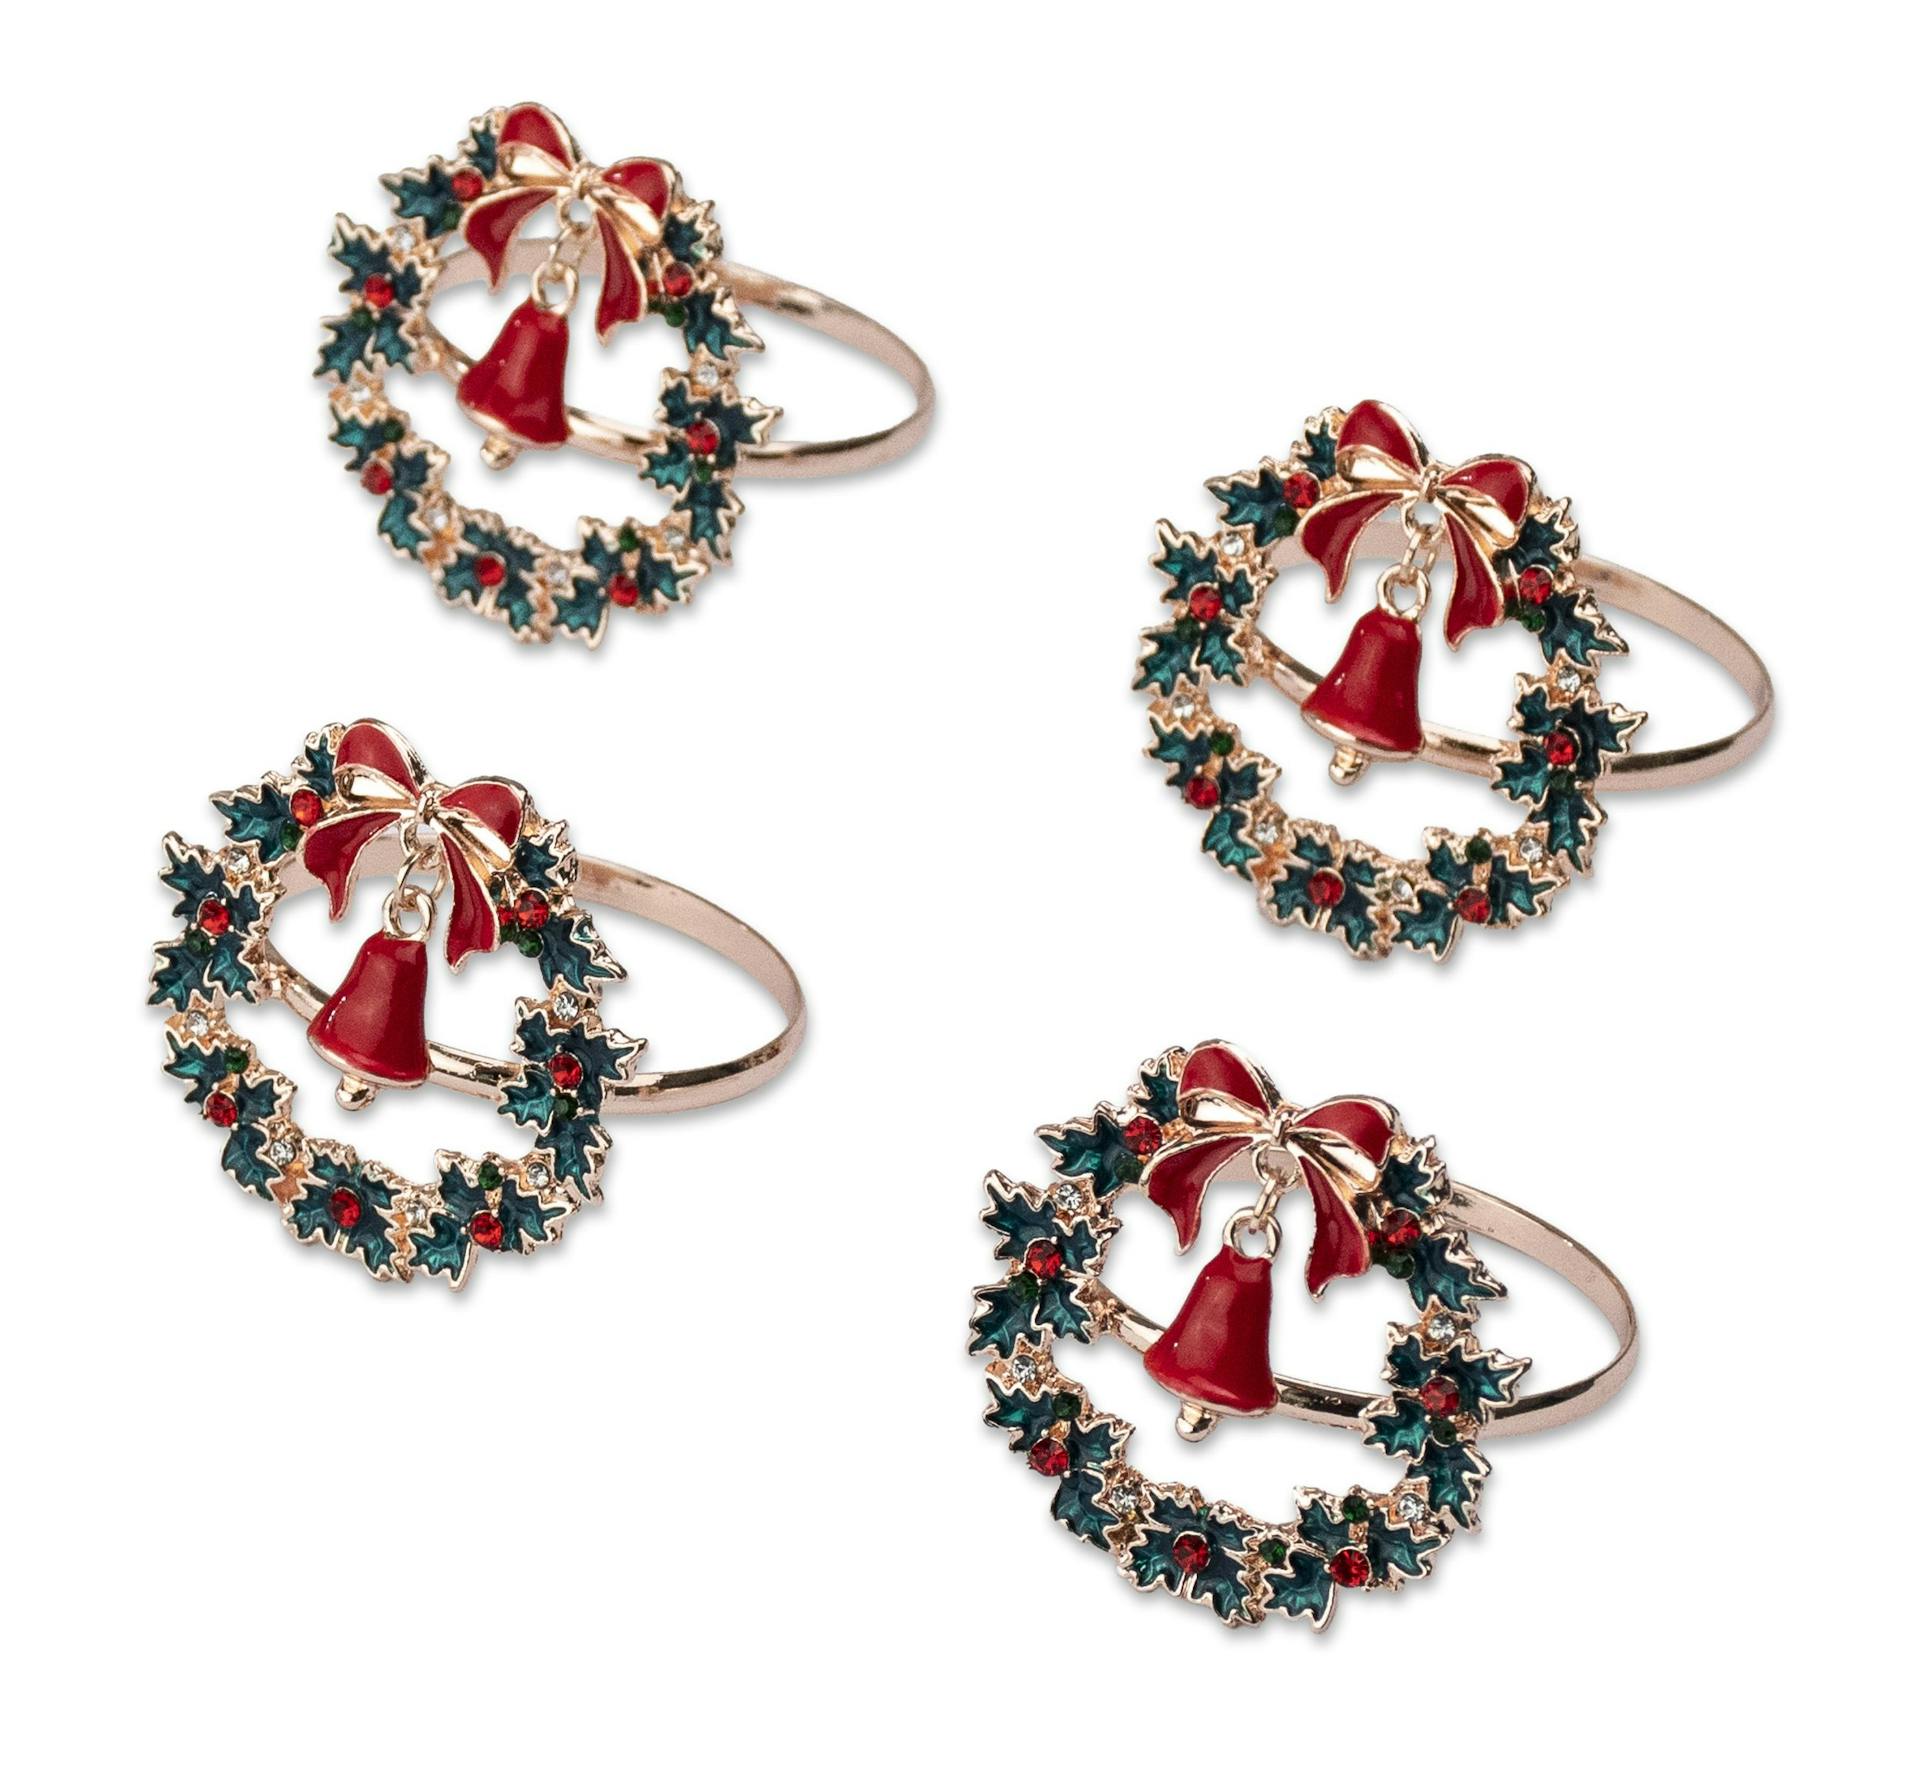 Beautiful Christmas/Holiday Wreath & Bell Napkin Rings Set of 4